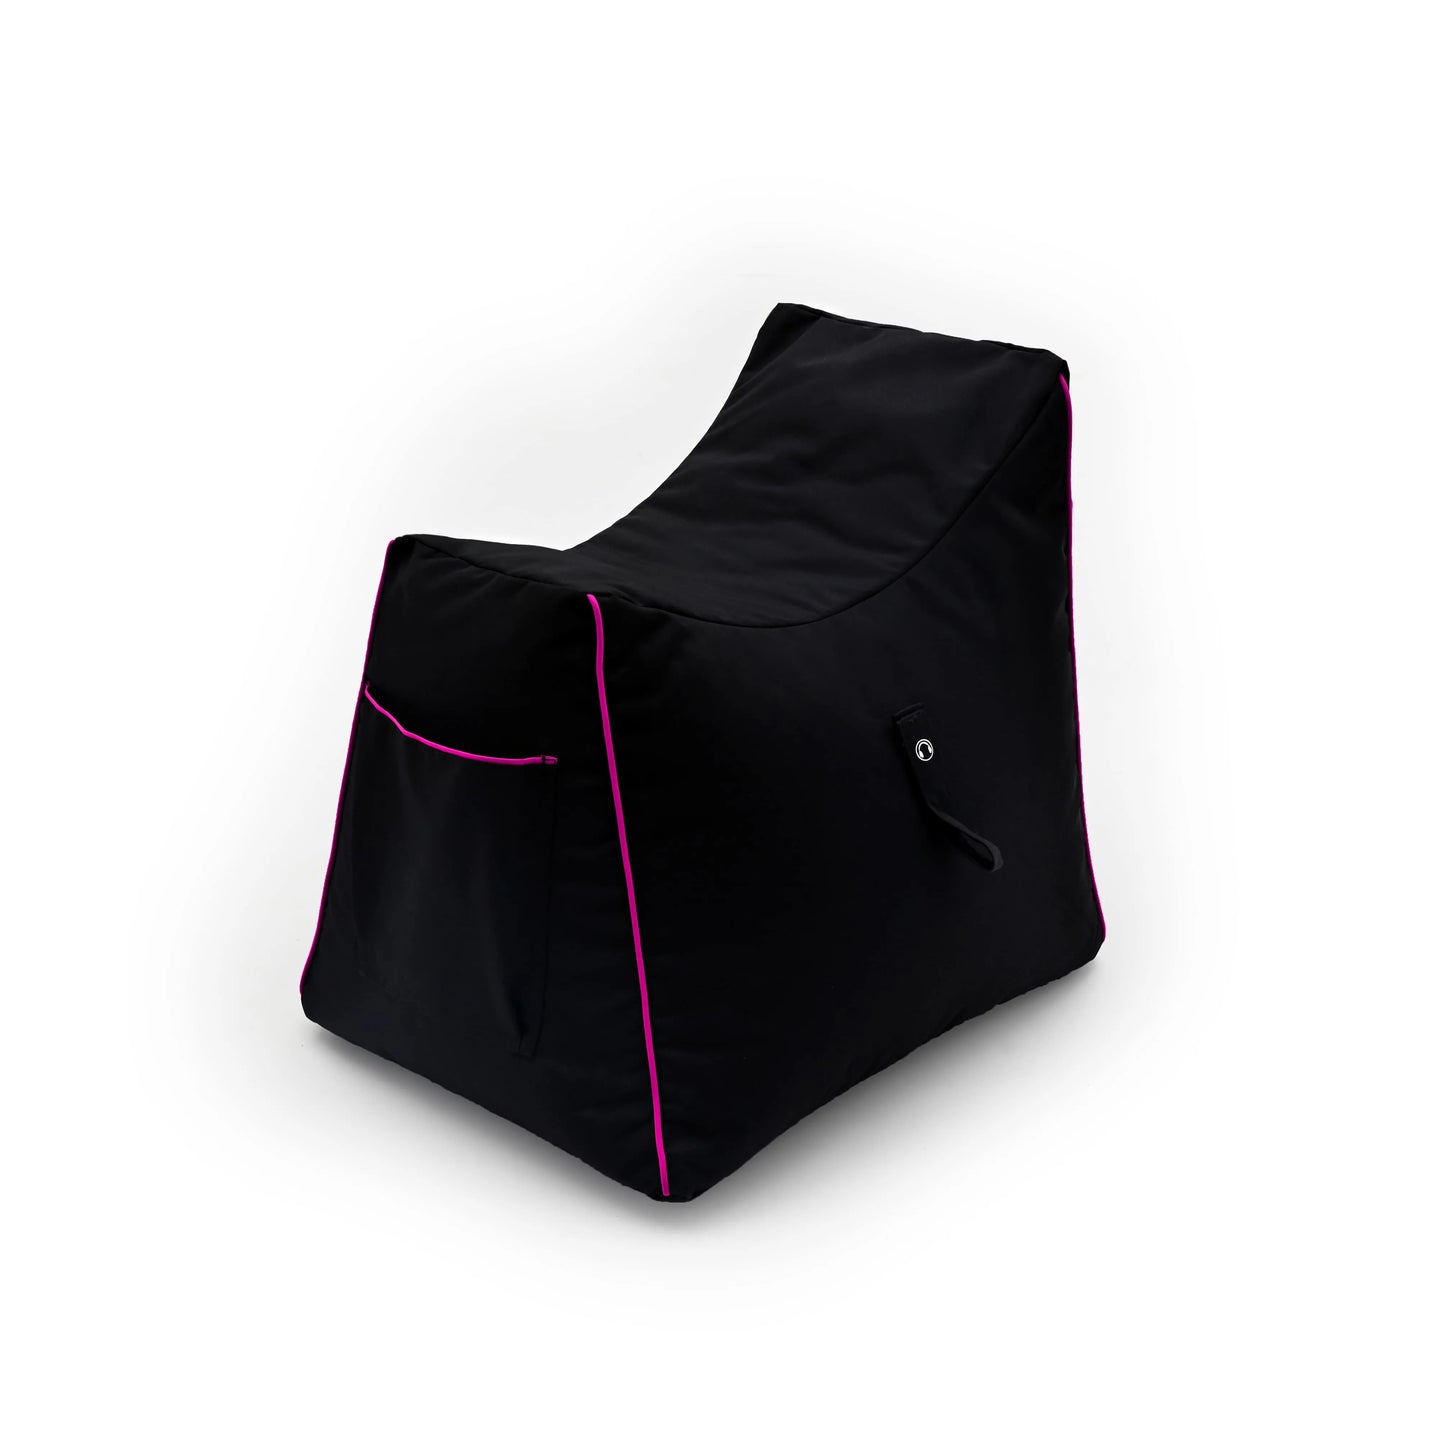 A cozy black beanbag cover with pink accents, perfect for gaming or lounging.